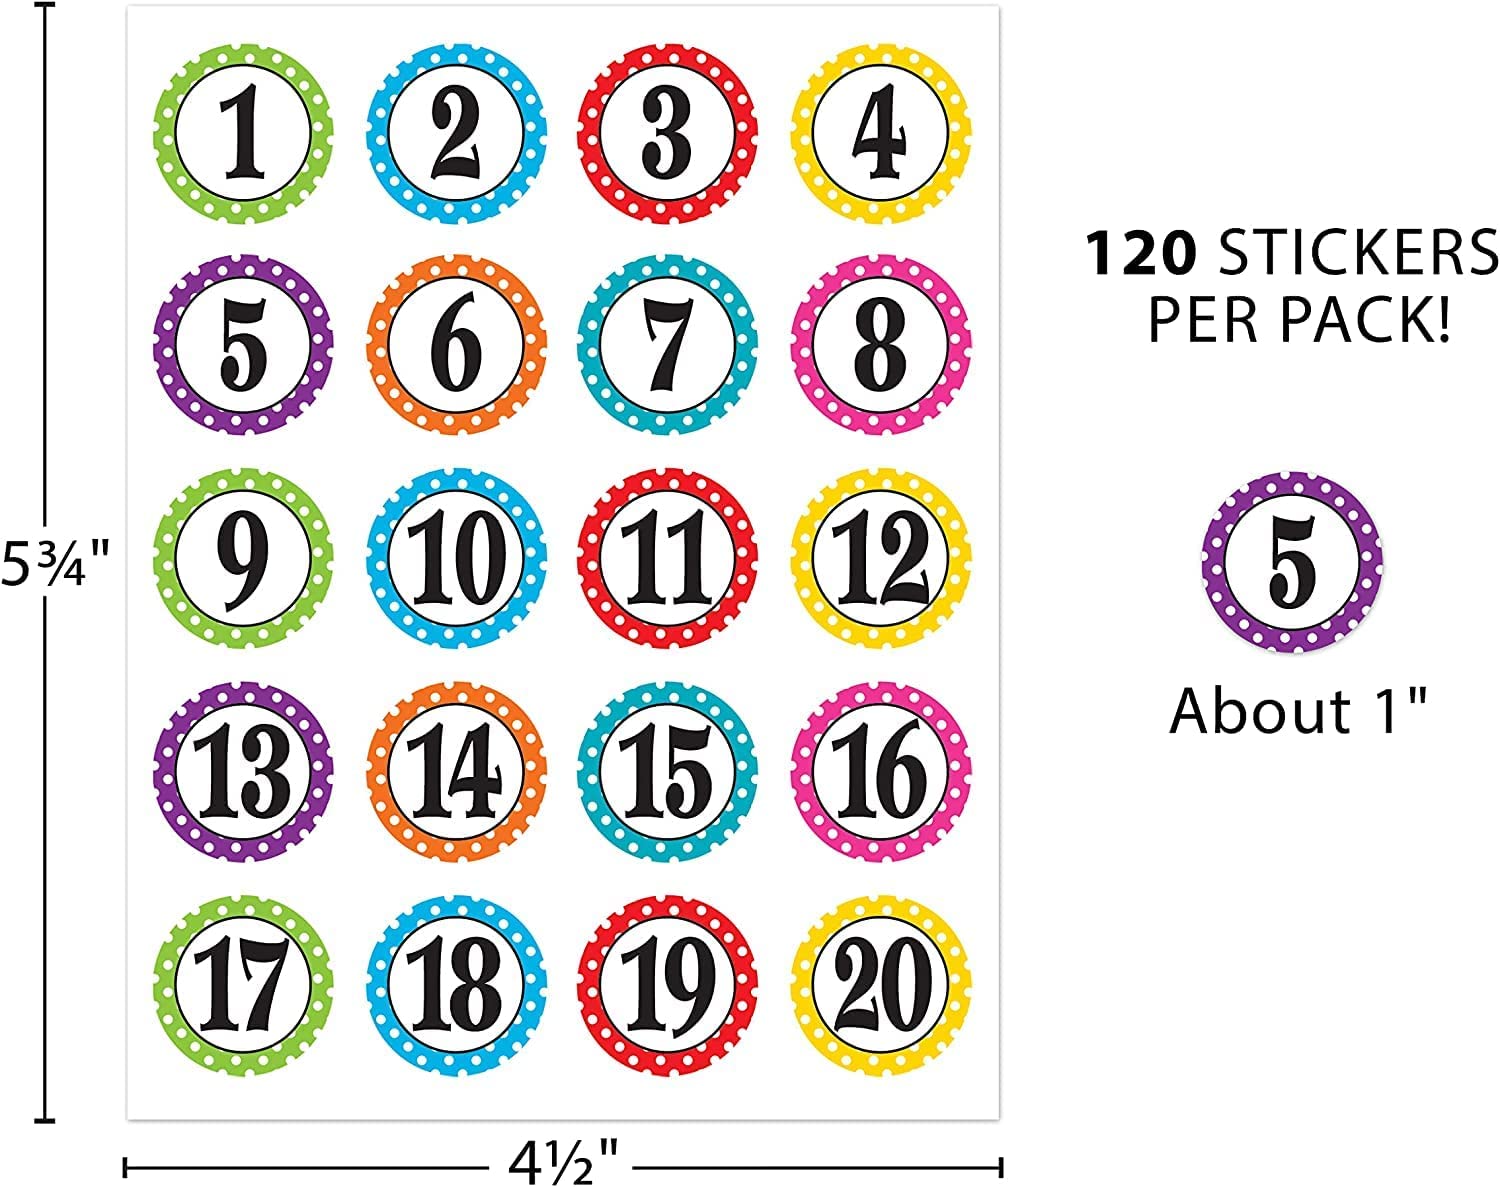 Round sticker numbers, 120 pieces from 1 to 40